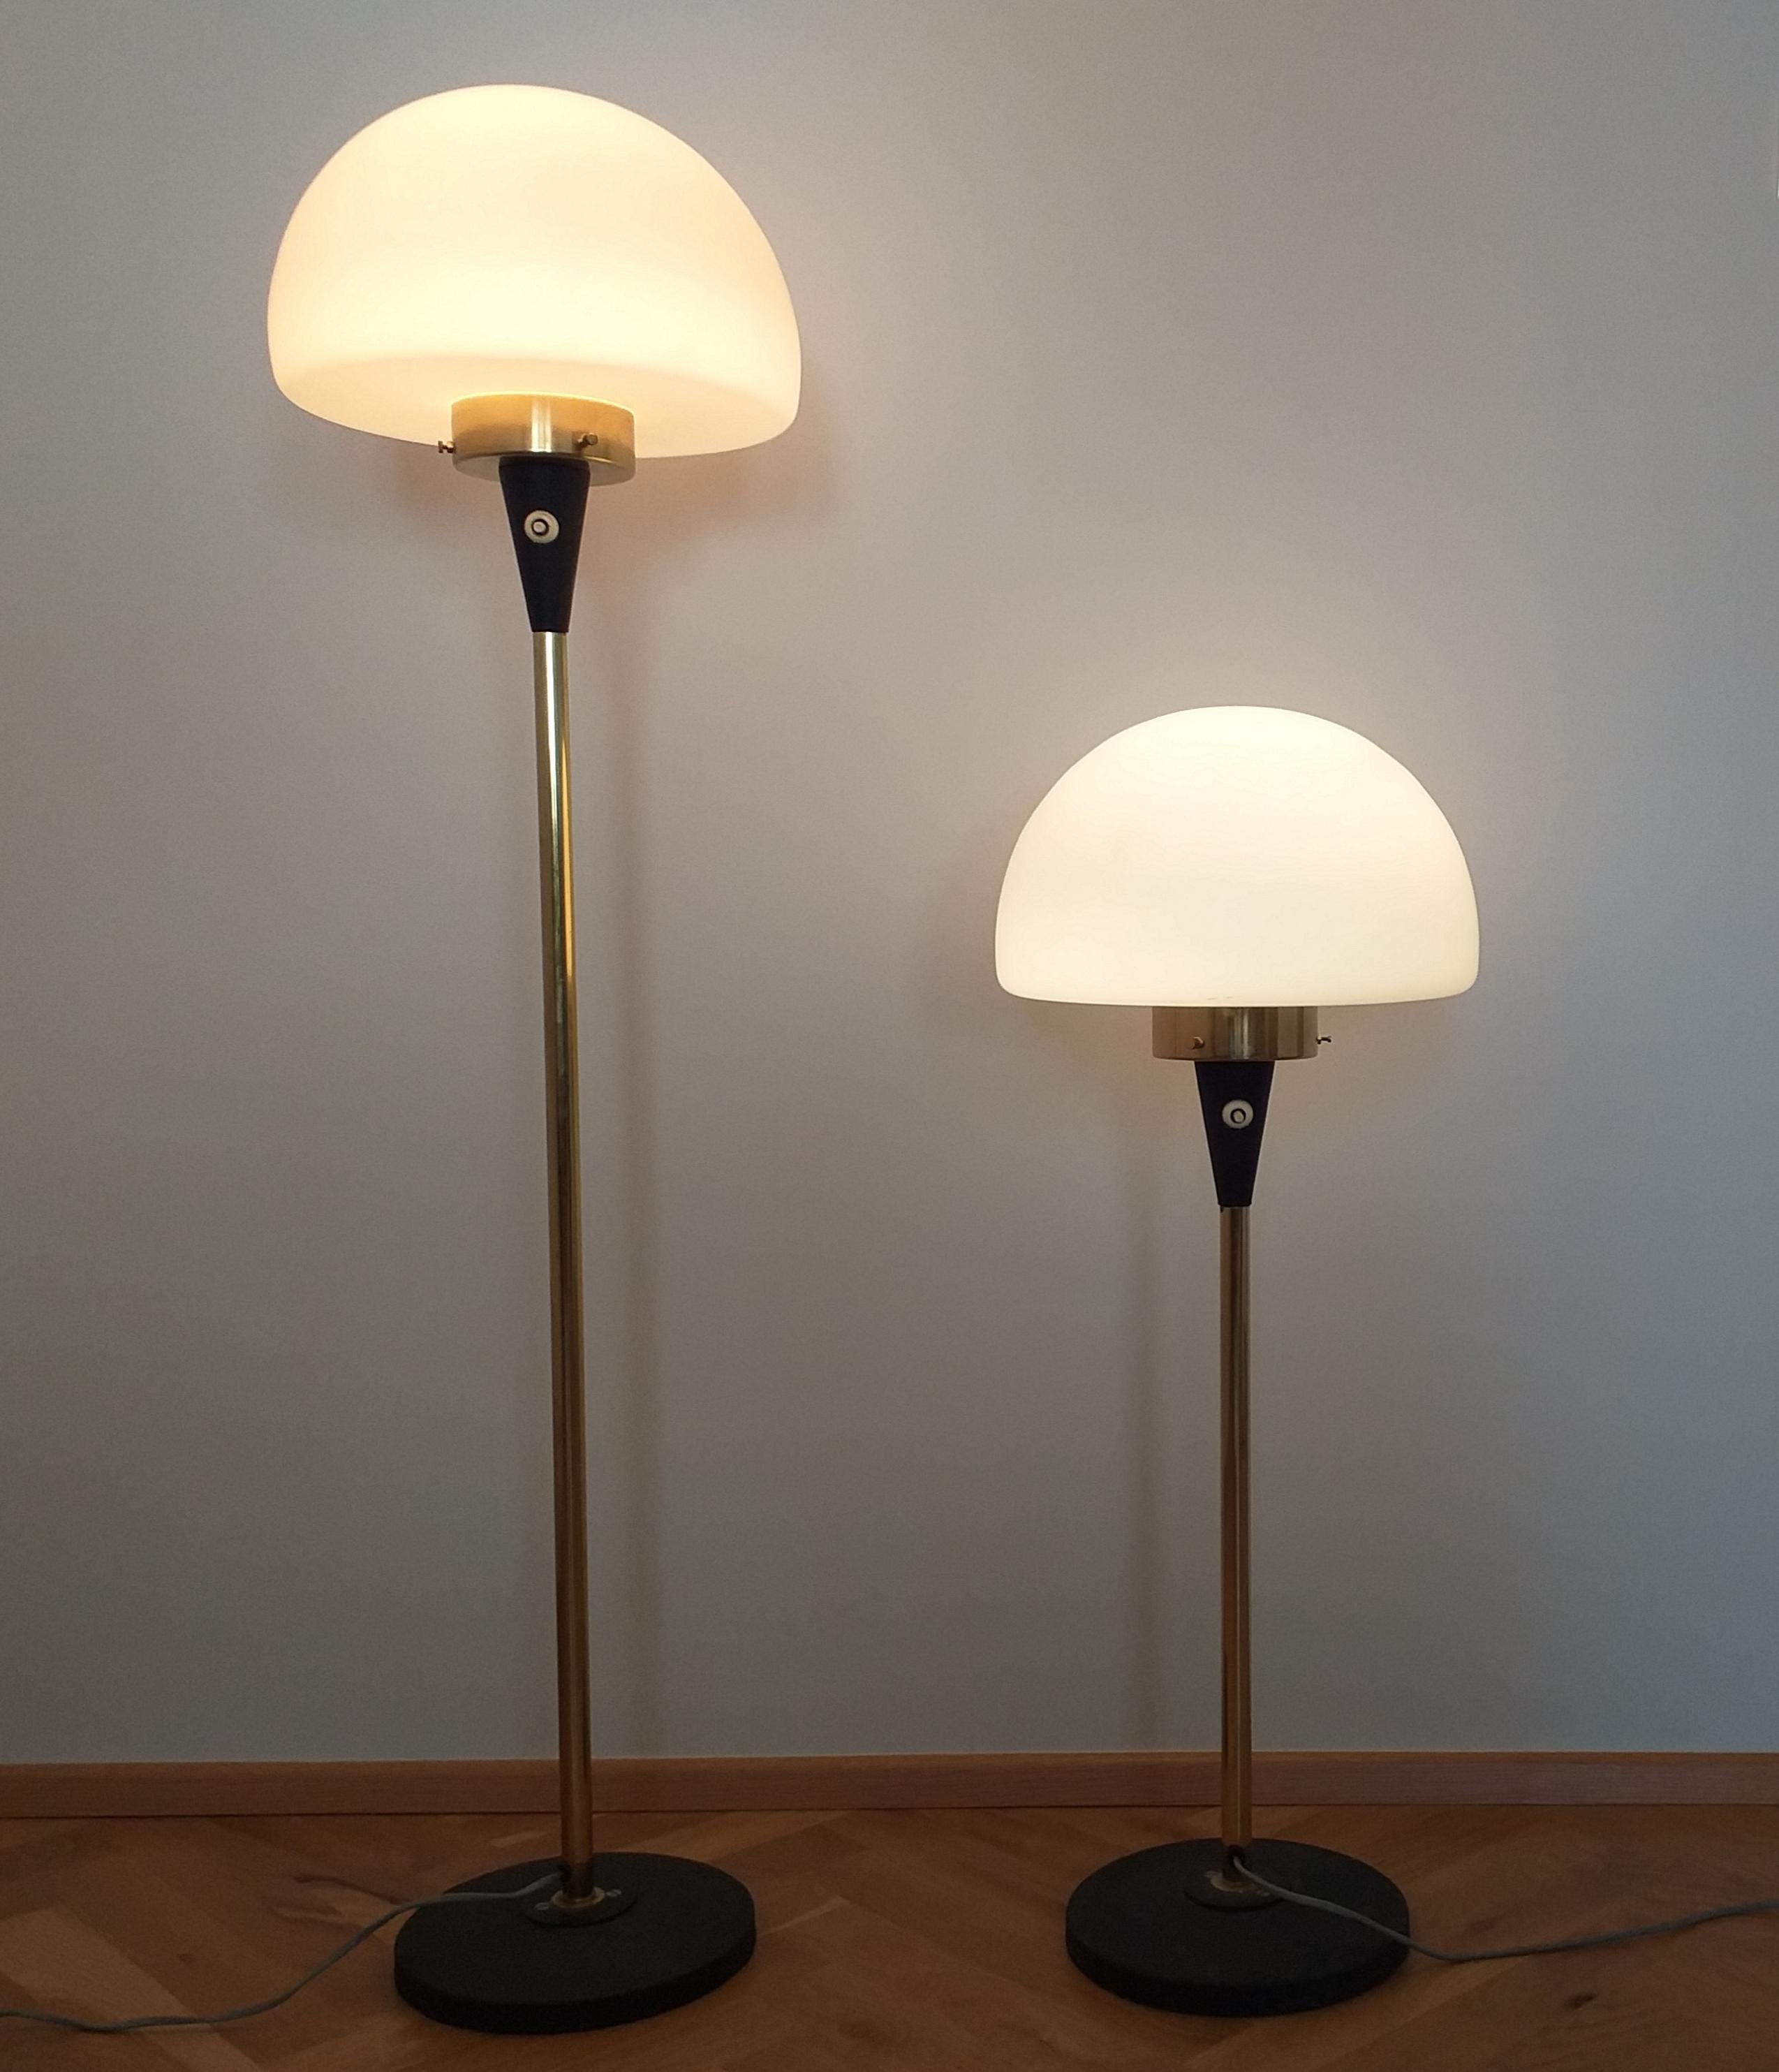 Set of Two Floor Lamps Lidokov Designed by Josef Hurka, 1970s For Sale 2